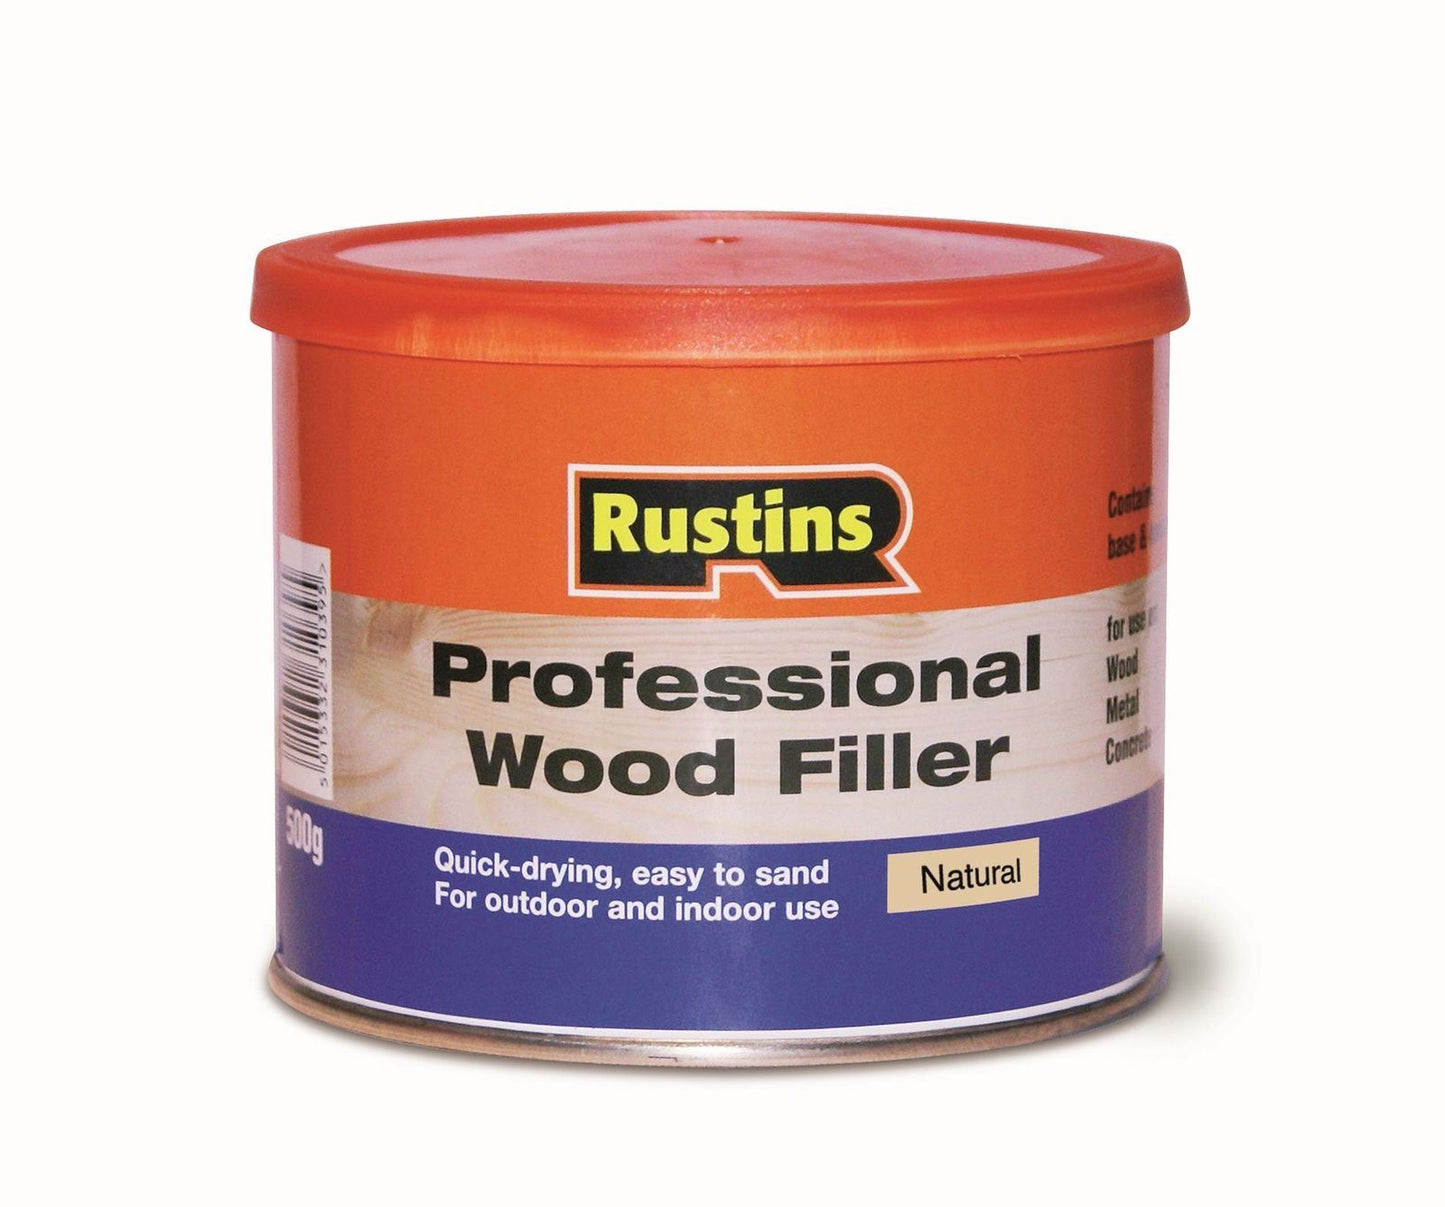 Rustins Natural Wood filler 250g for Wood Repairs and Chips - Quick Drying